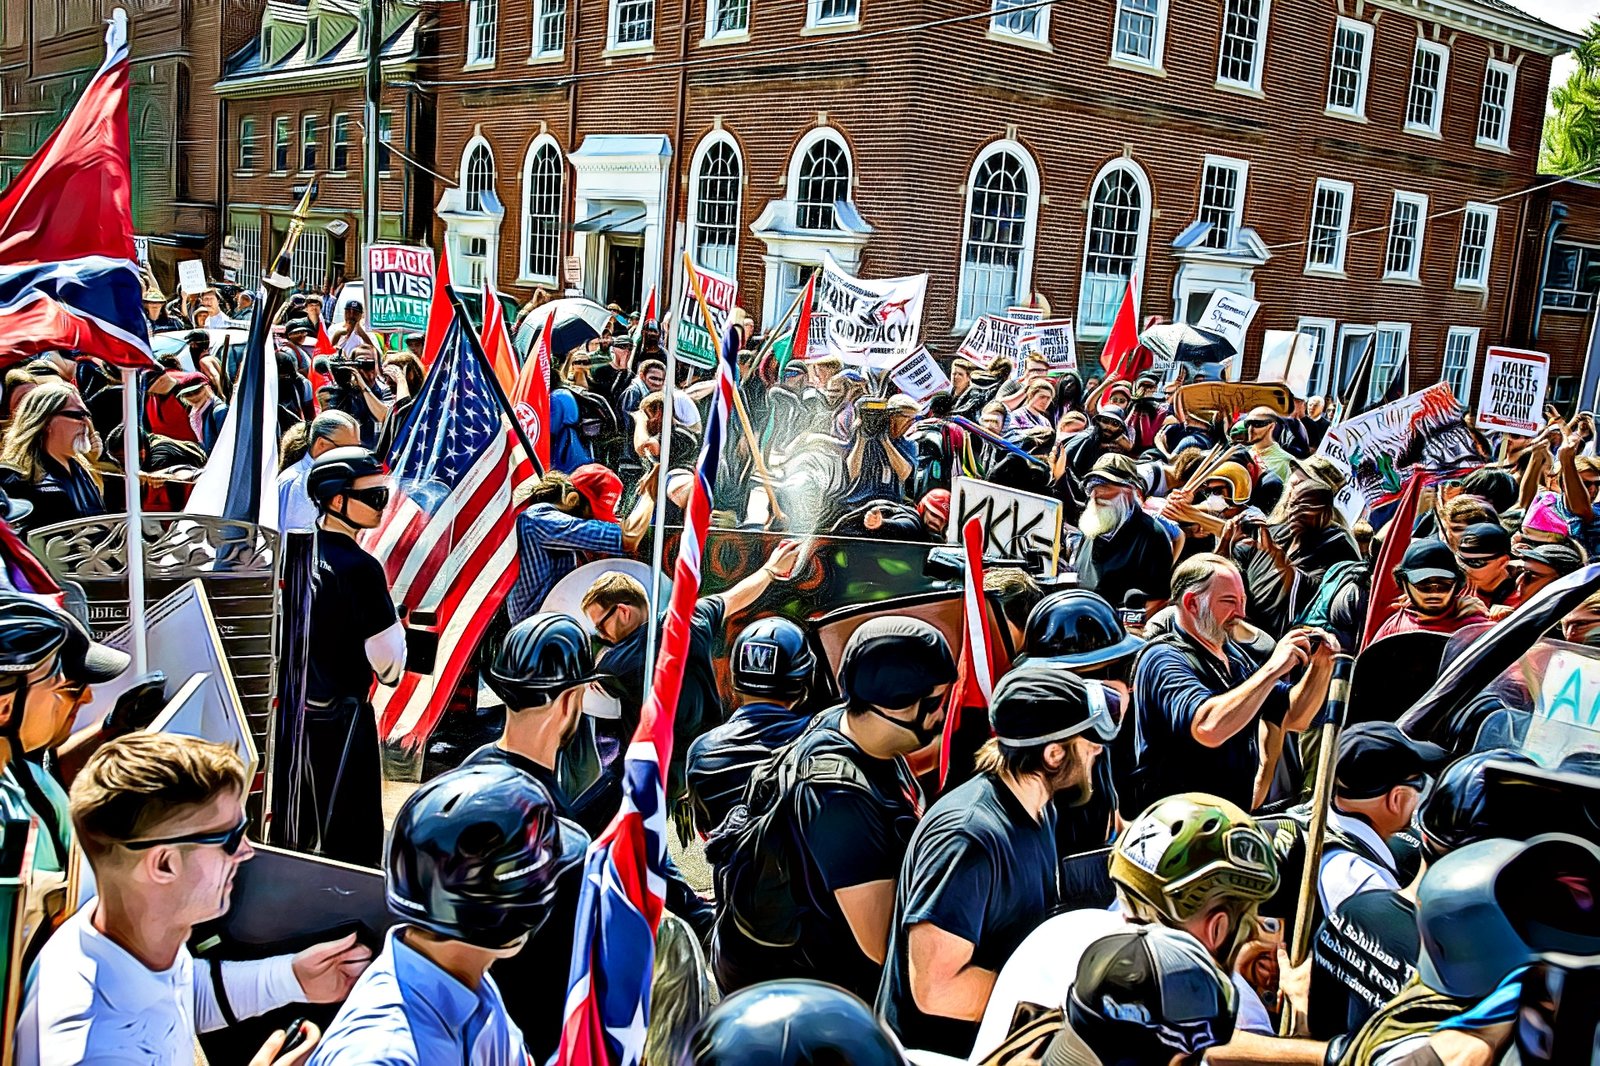 After Charlottesville: When Will the United States Transcend White Supremacy?